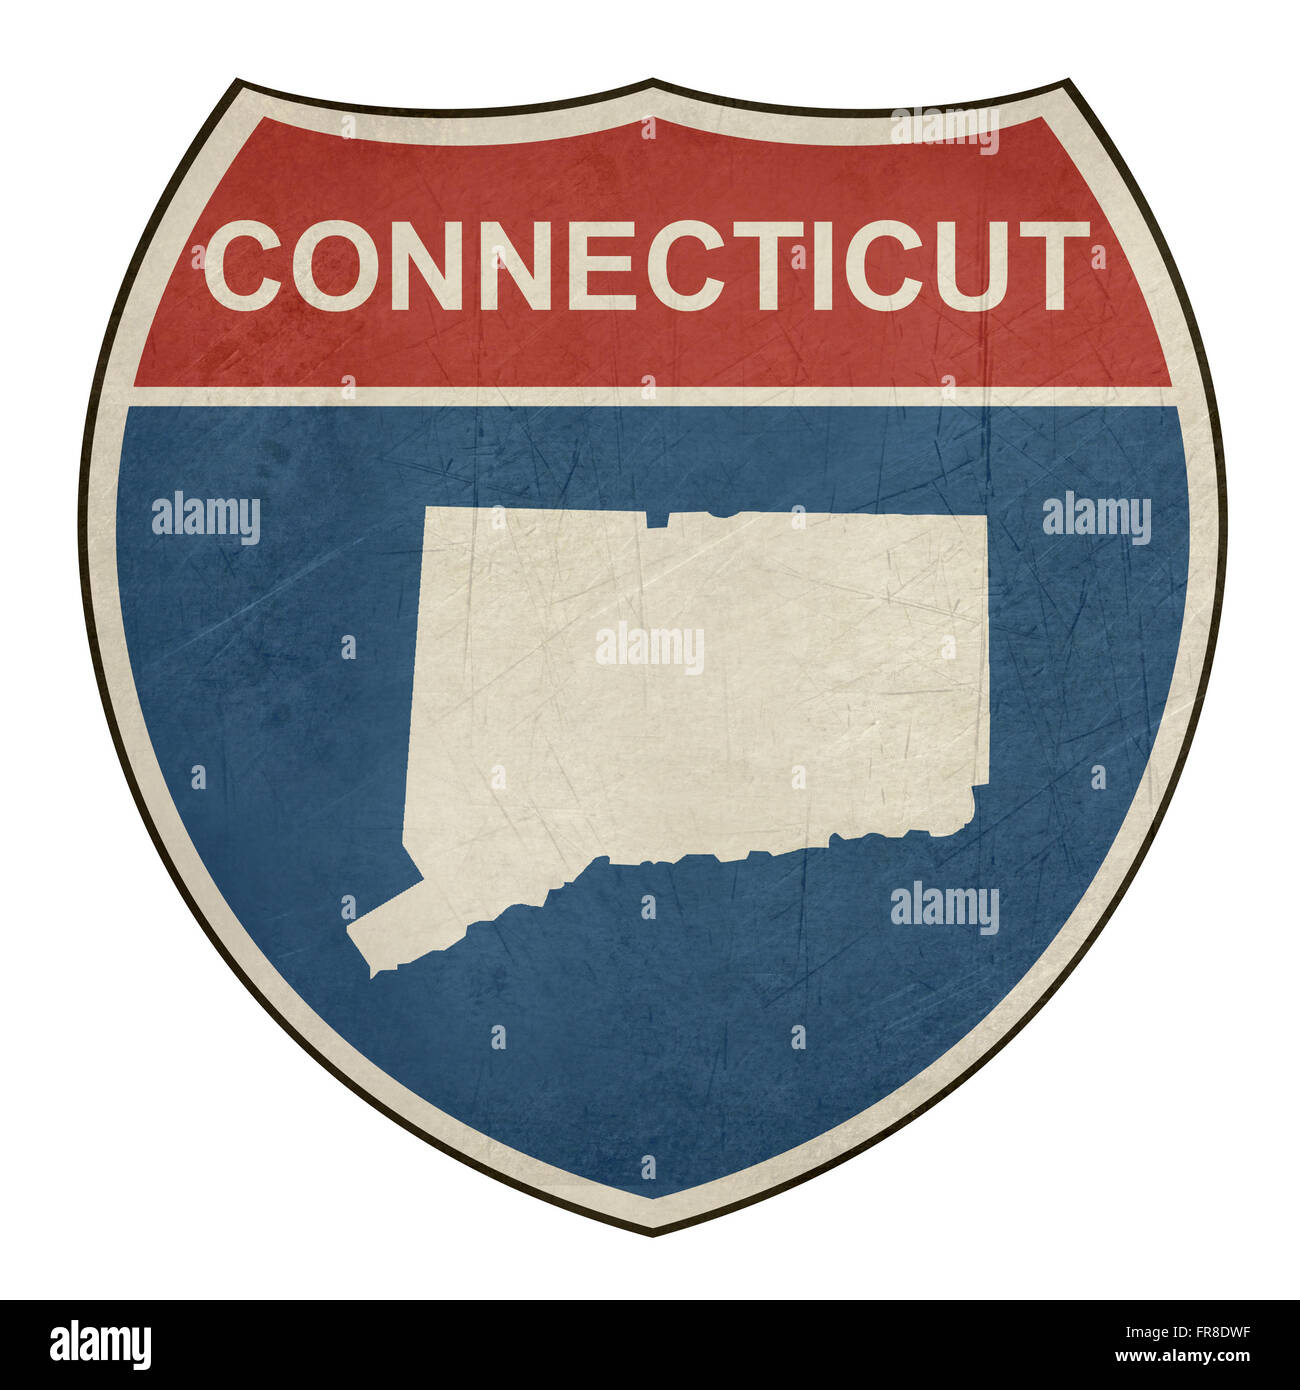 Connecticut American interstate highway road shield isolated on a white background. Stock Photo